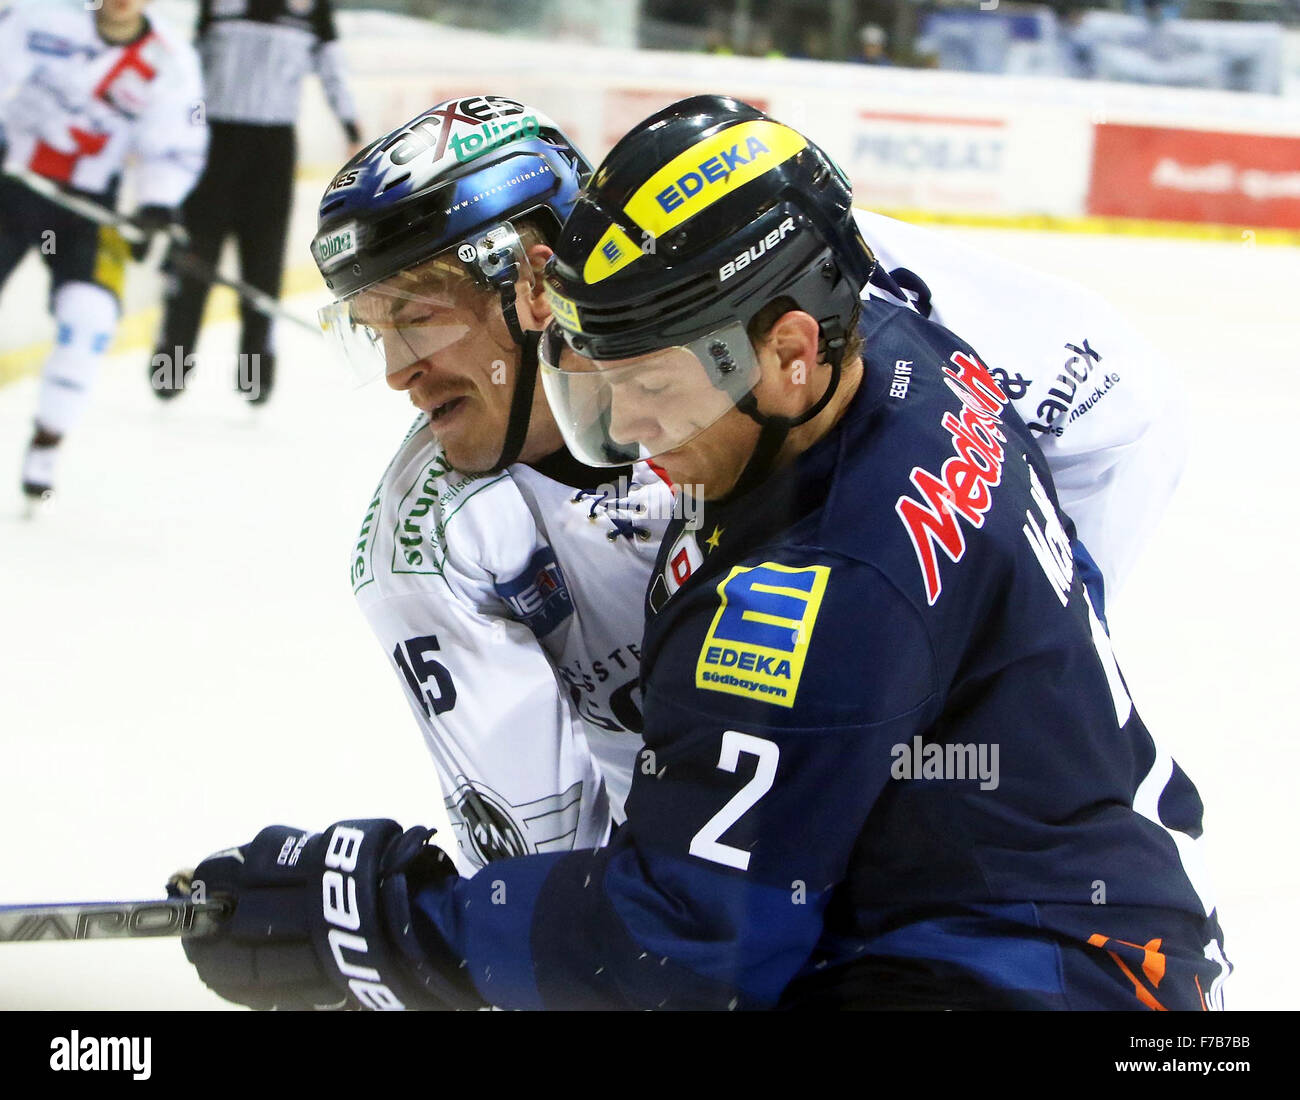 Ingolstadt, Bavaria, Germany. 27th Nov, 2015. from left T.J. MULOCK (Berlin/CAN), Patrick MCNEILL (Ingolstadt/CAN), .Ice Hockey German Eishockey League, matchday 21, ERC Ingolstadt vs Eisbaeren Berlin, Ingolstadt, Saturn-Arena, November 27th, 2015, the two former champions meet at the first match of the former AHL heacoach and new Ingolstadt headcoach Kurt Kleinendorst. © Wolfgang Fehrmann/ZUMA Wire/Alamy Live News Stock Photo